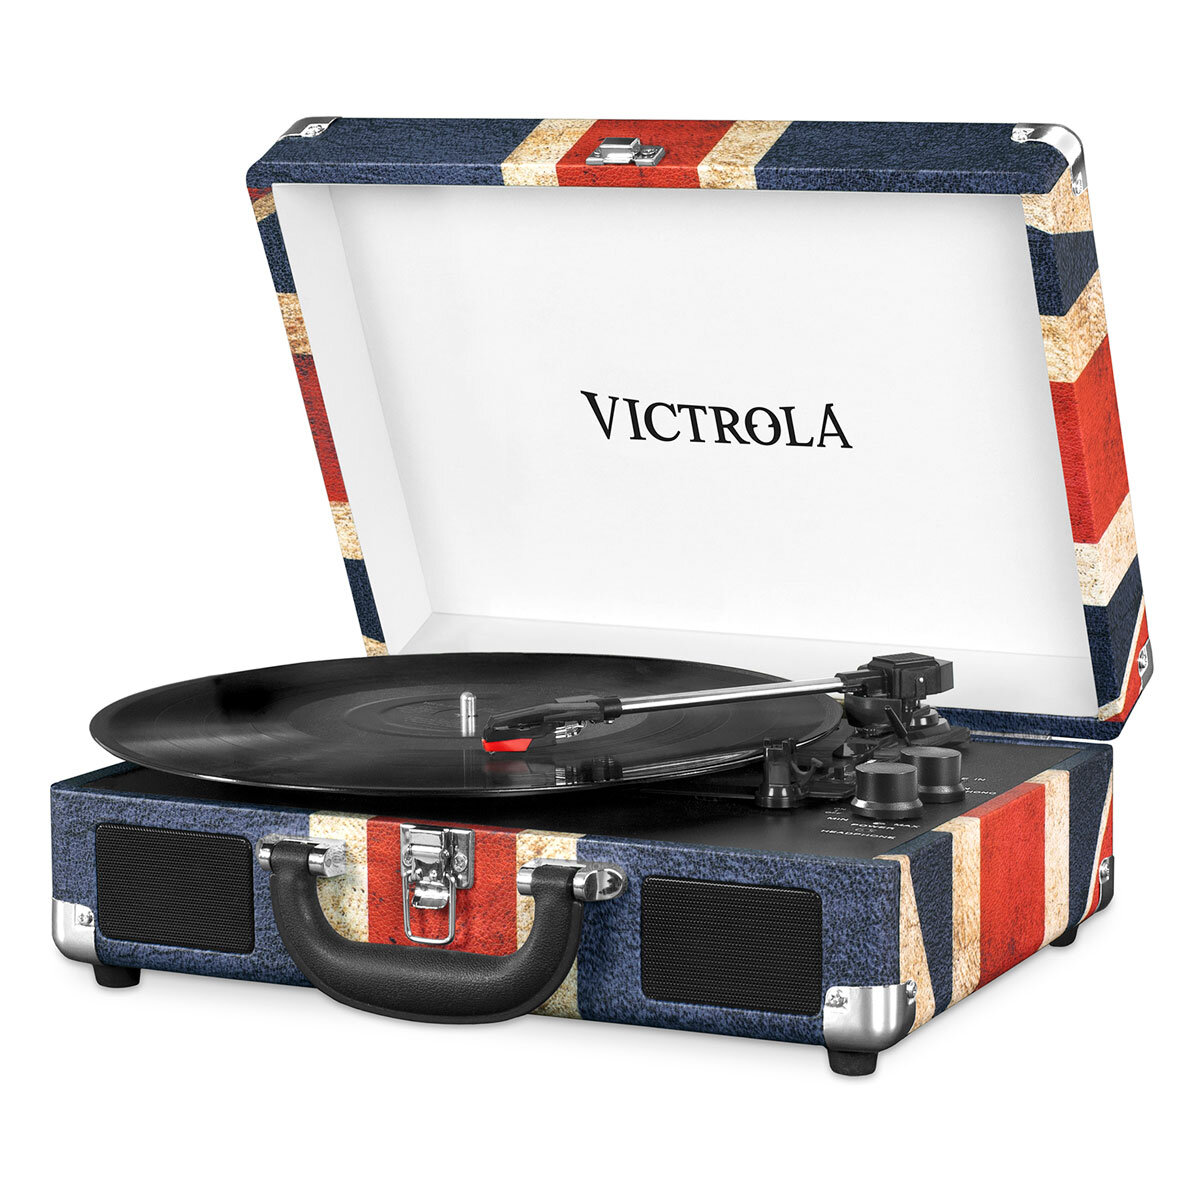 Victrola Journey VSC-550BT, Record Player with 3 Speeds, Bluetooth in 4 Colours